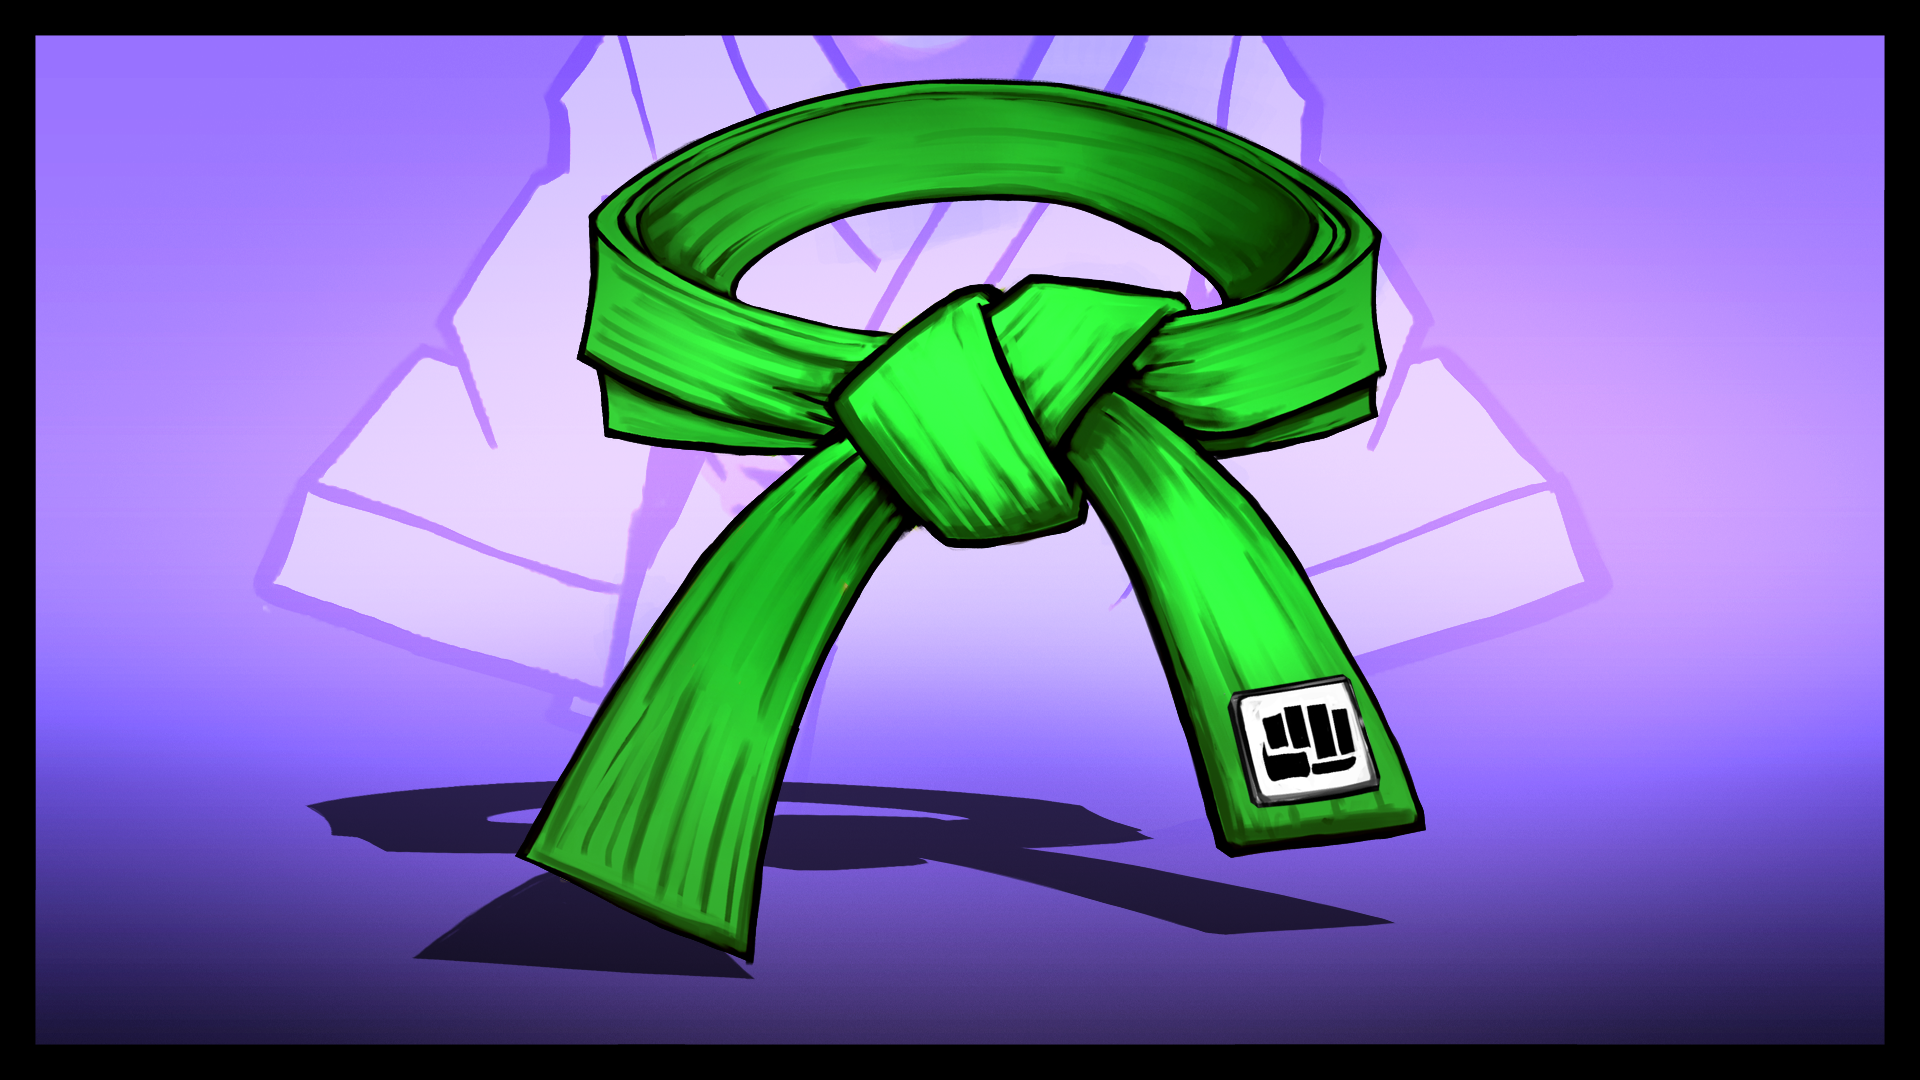 Icon for Green Belt